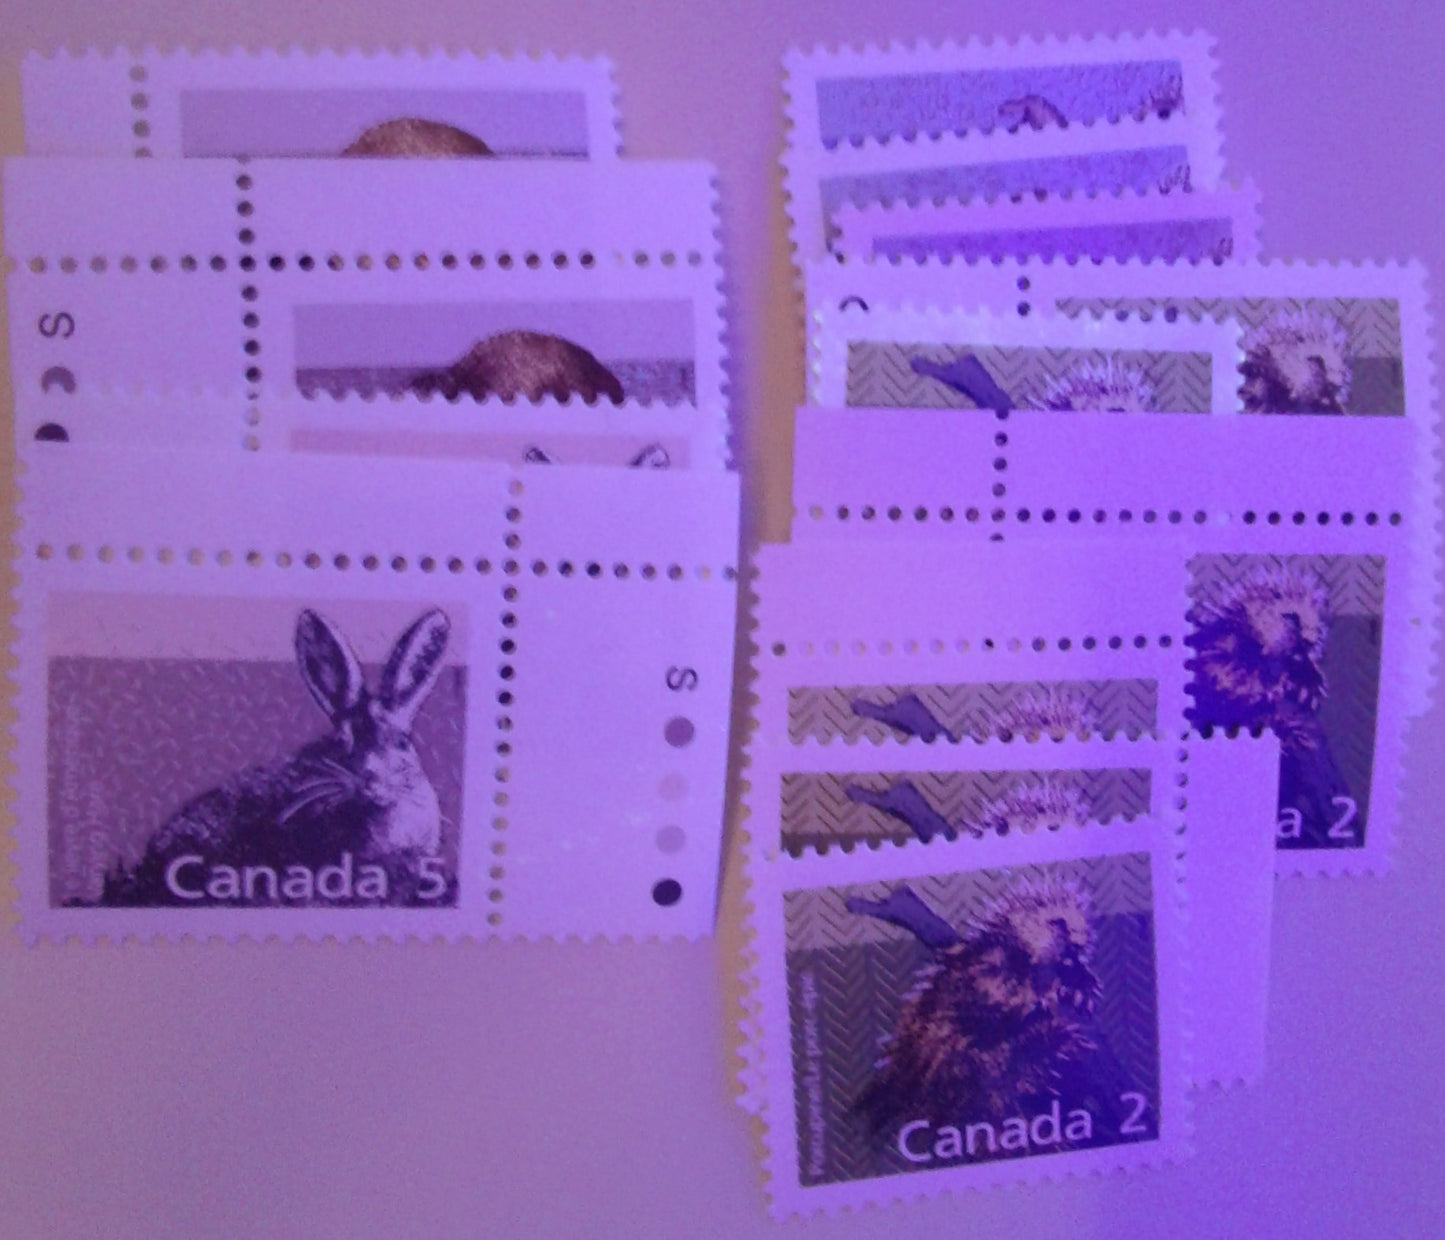 Canada #1180c 80c Peary Caribou 1988-1991 Wildlife and Architecture Issue, VFNH UR Inscription Block on DF/LF Peterborough Paper, Perf. 14.4 x 13.8